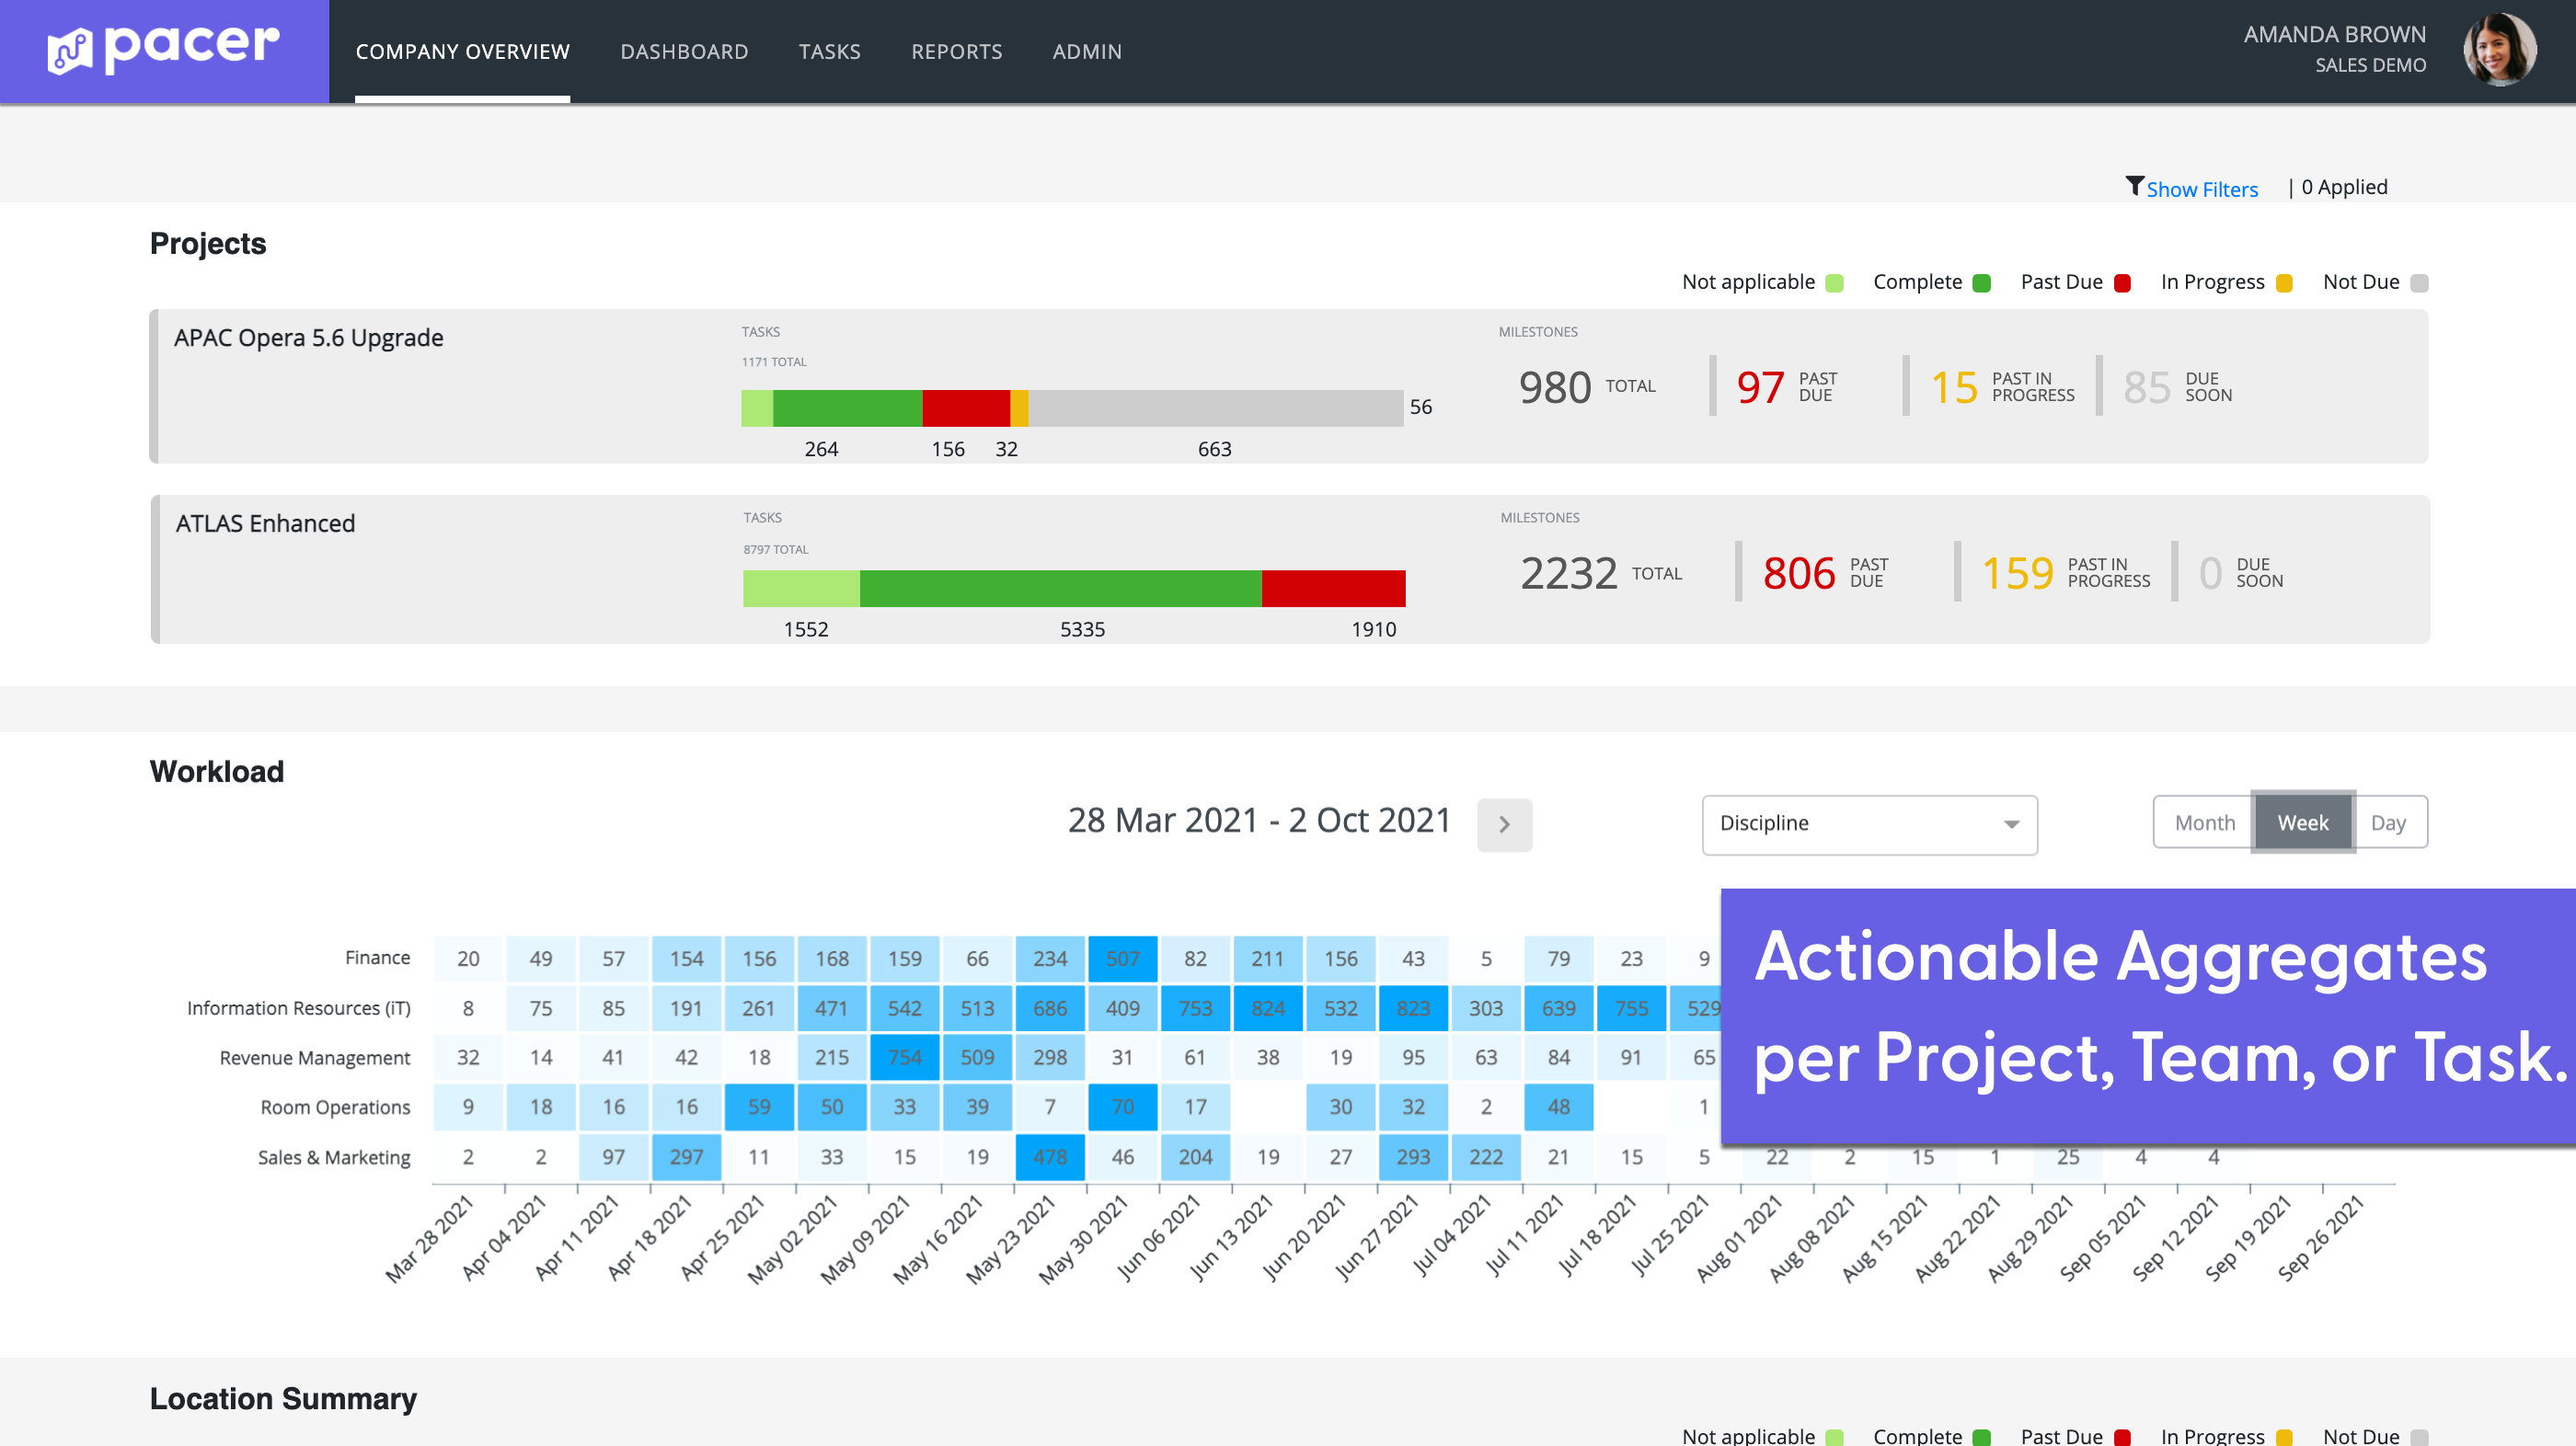 Providing Actionable Data - Pacer turns data into action by giving you command and control. Prioritize time-sensitive tasks, export stats and insights into weekly status reports, access multiple views of project milestones to troubleshoot potential delays